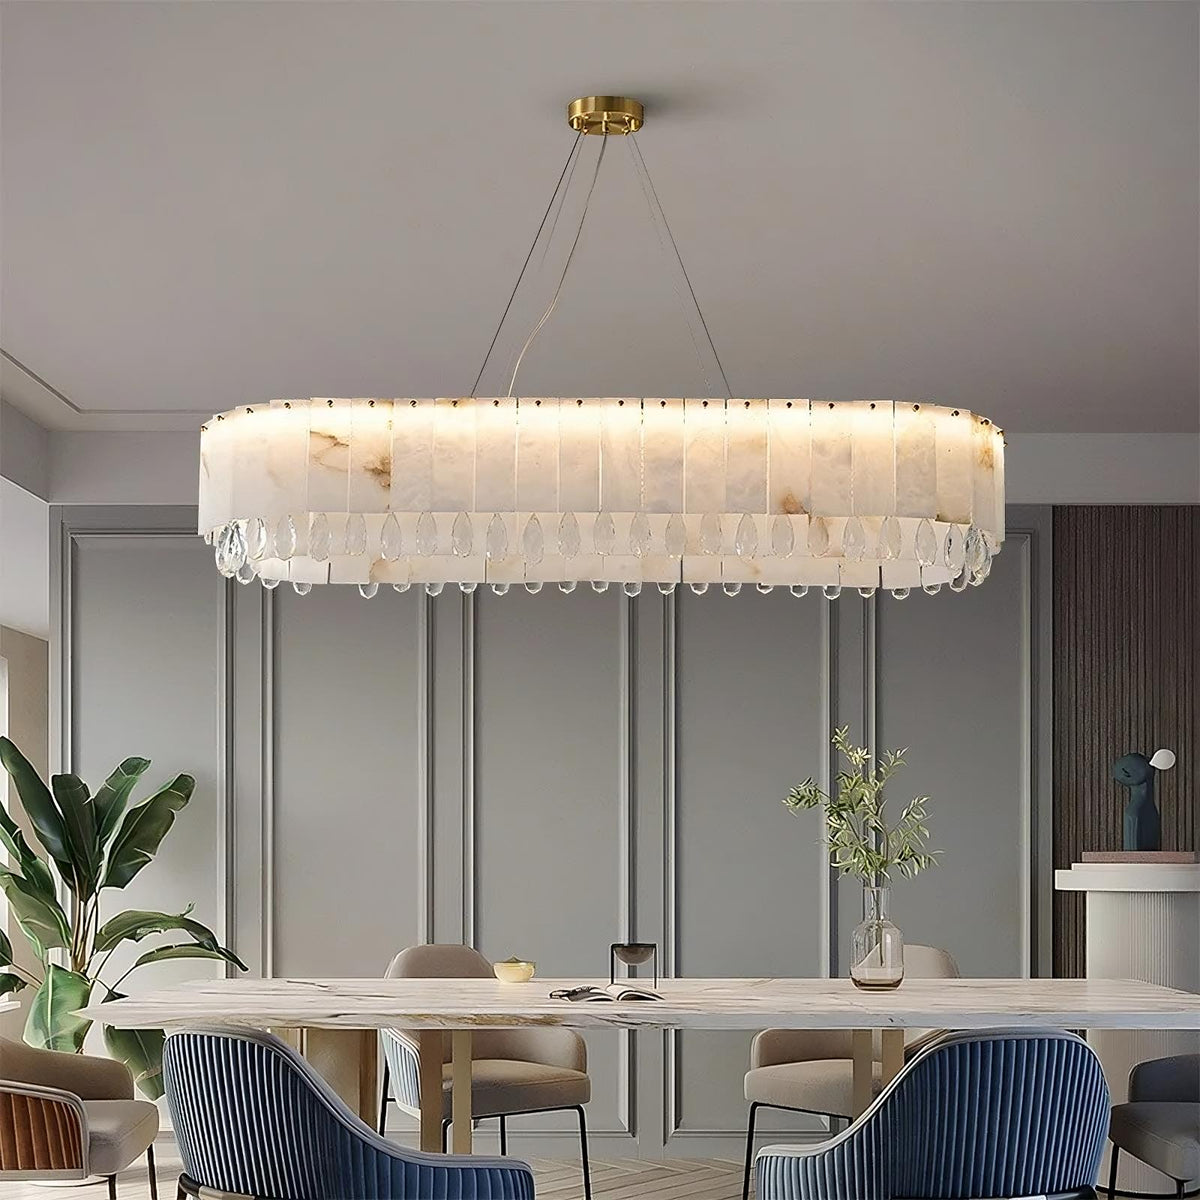 A modern dining room features a large, oval-shaped Morsale Natural Marble & Crystal Dining Room Chandelier with a translucent, decorative design and a sleek copper frame hanging from the ceiling. Below, a long dining table is surrounded by beige and blue chairs. A potted plant and vase with flowers add natural touches to the space.